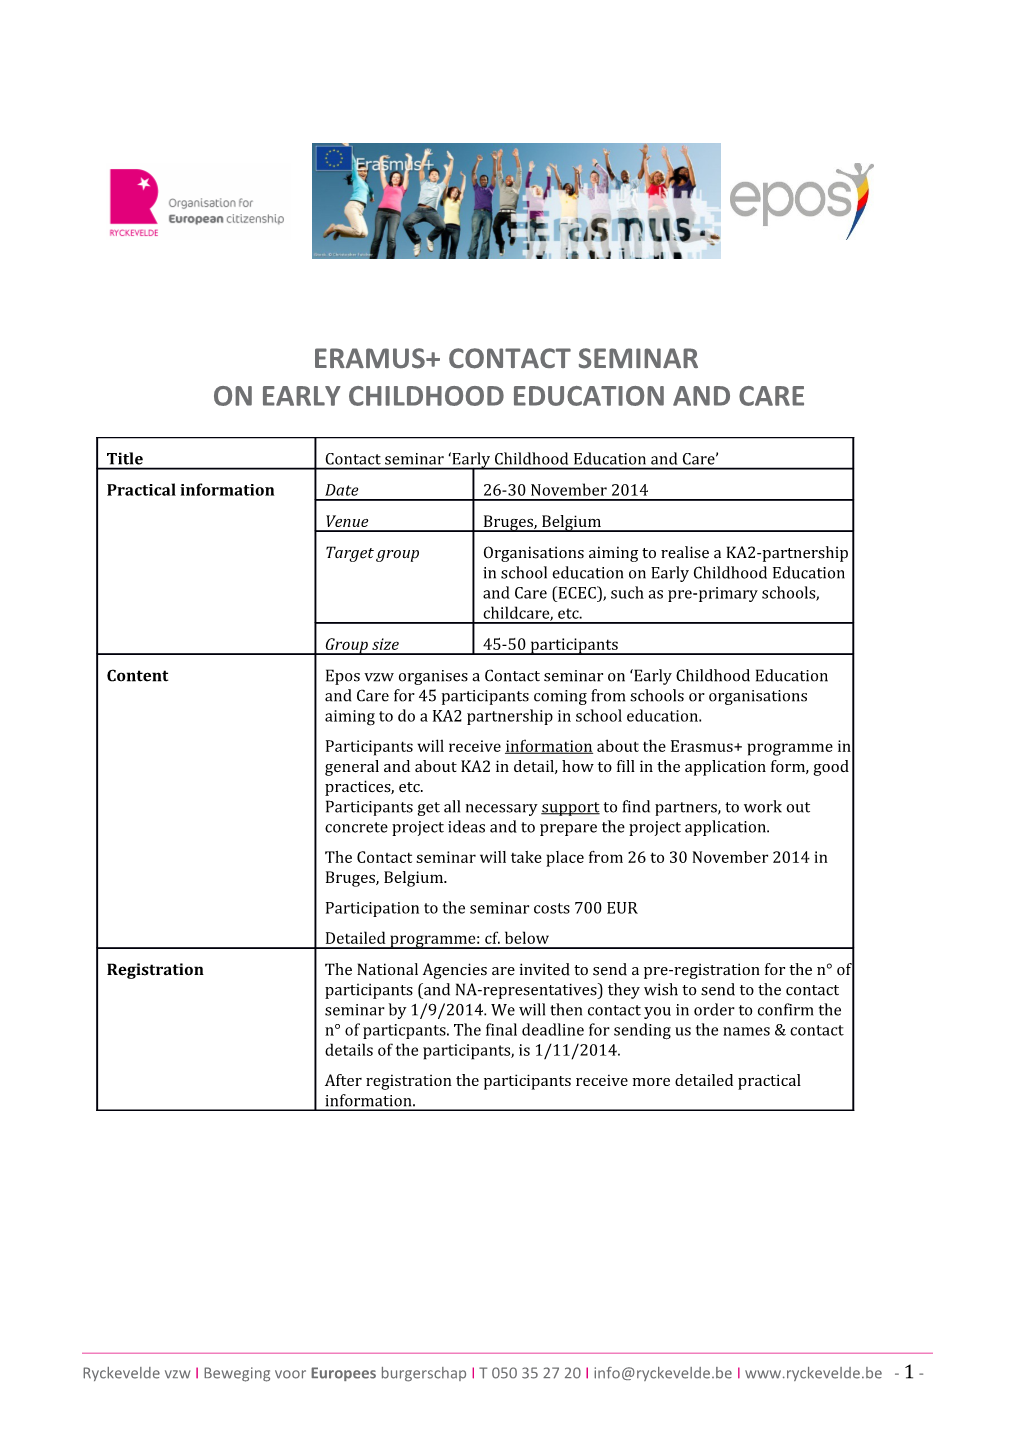 Eramus+ Contact Seminar on Early Childhood Education and Care